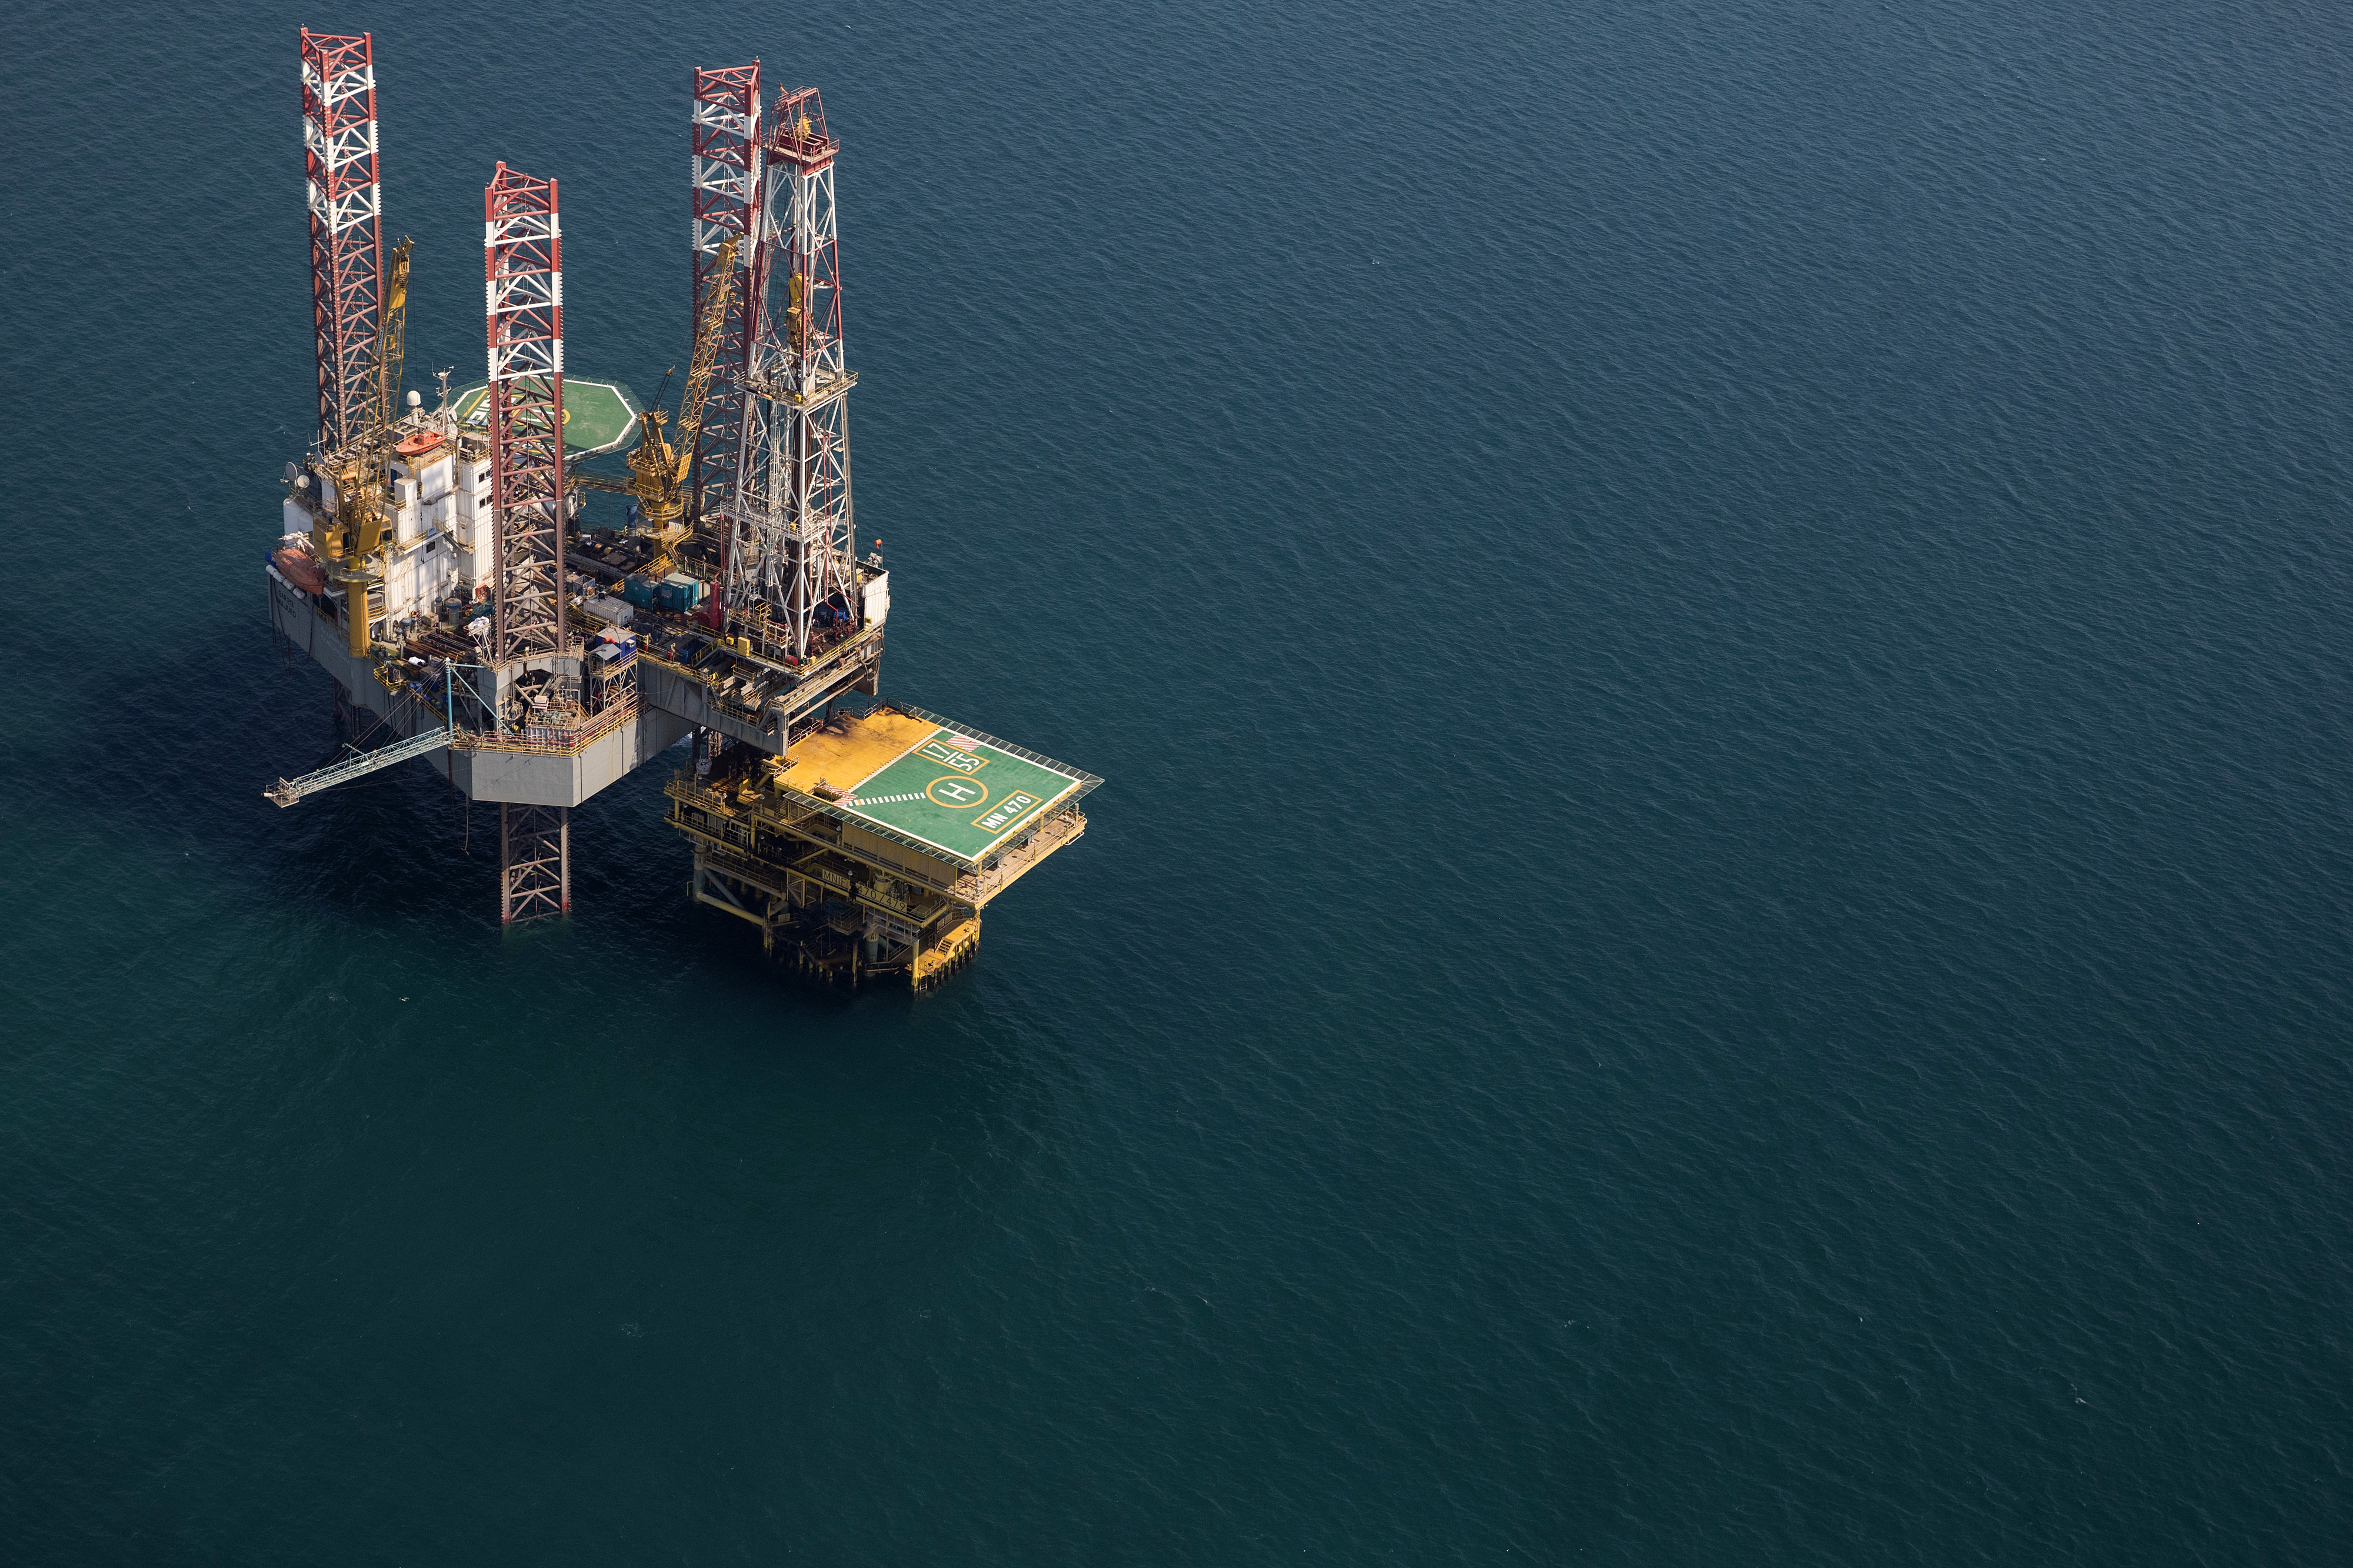 An oil drilling platform in the sea